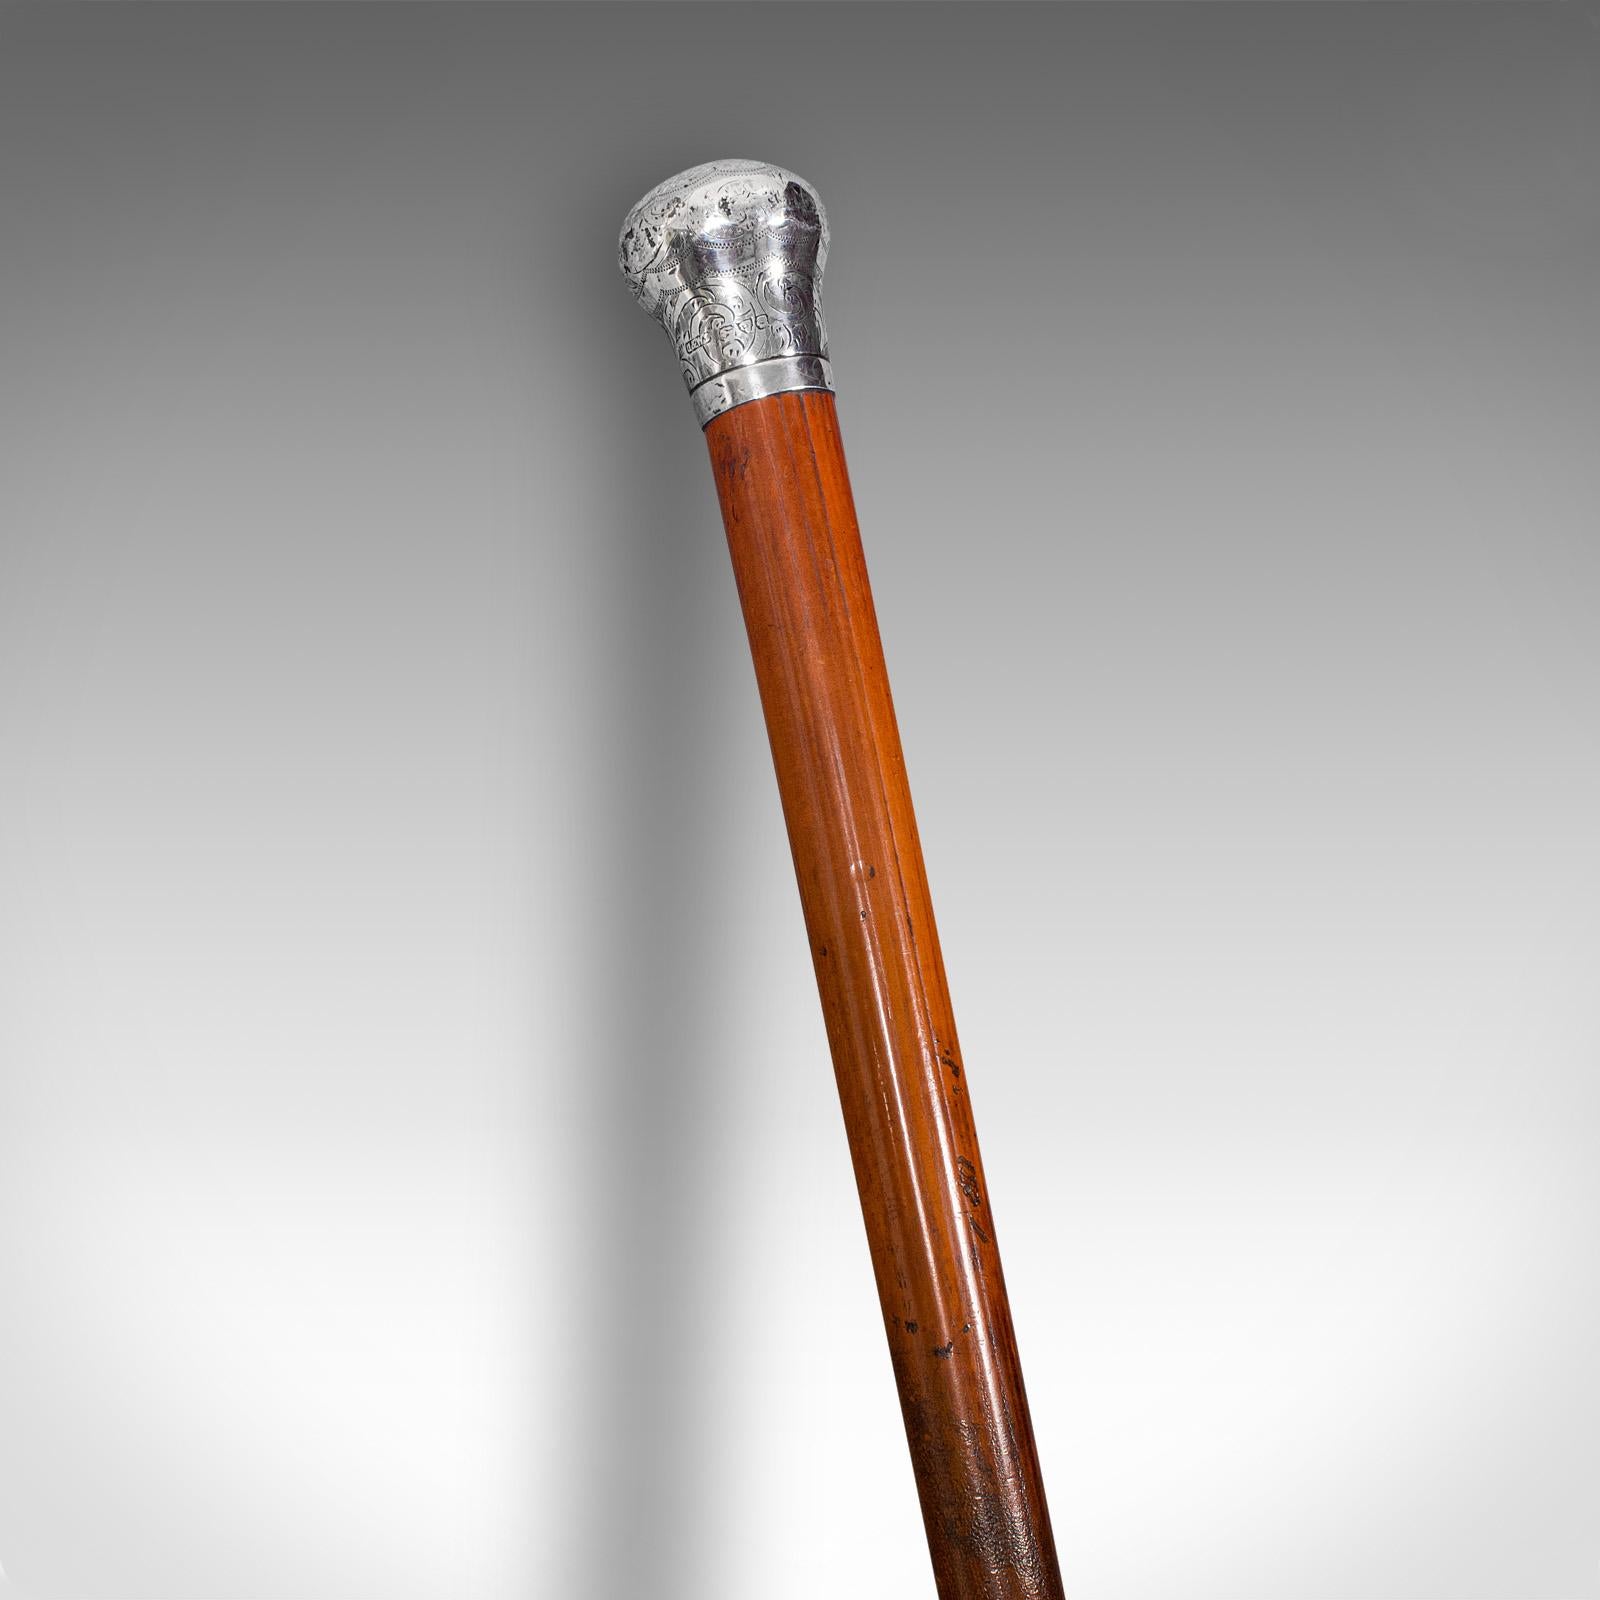 Late Victorian Antique Dandy's Walking Cane, English, Fruitwood Stick, Silver Handle, Victorian